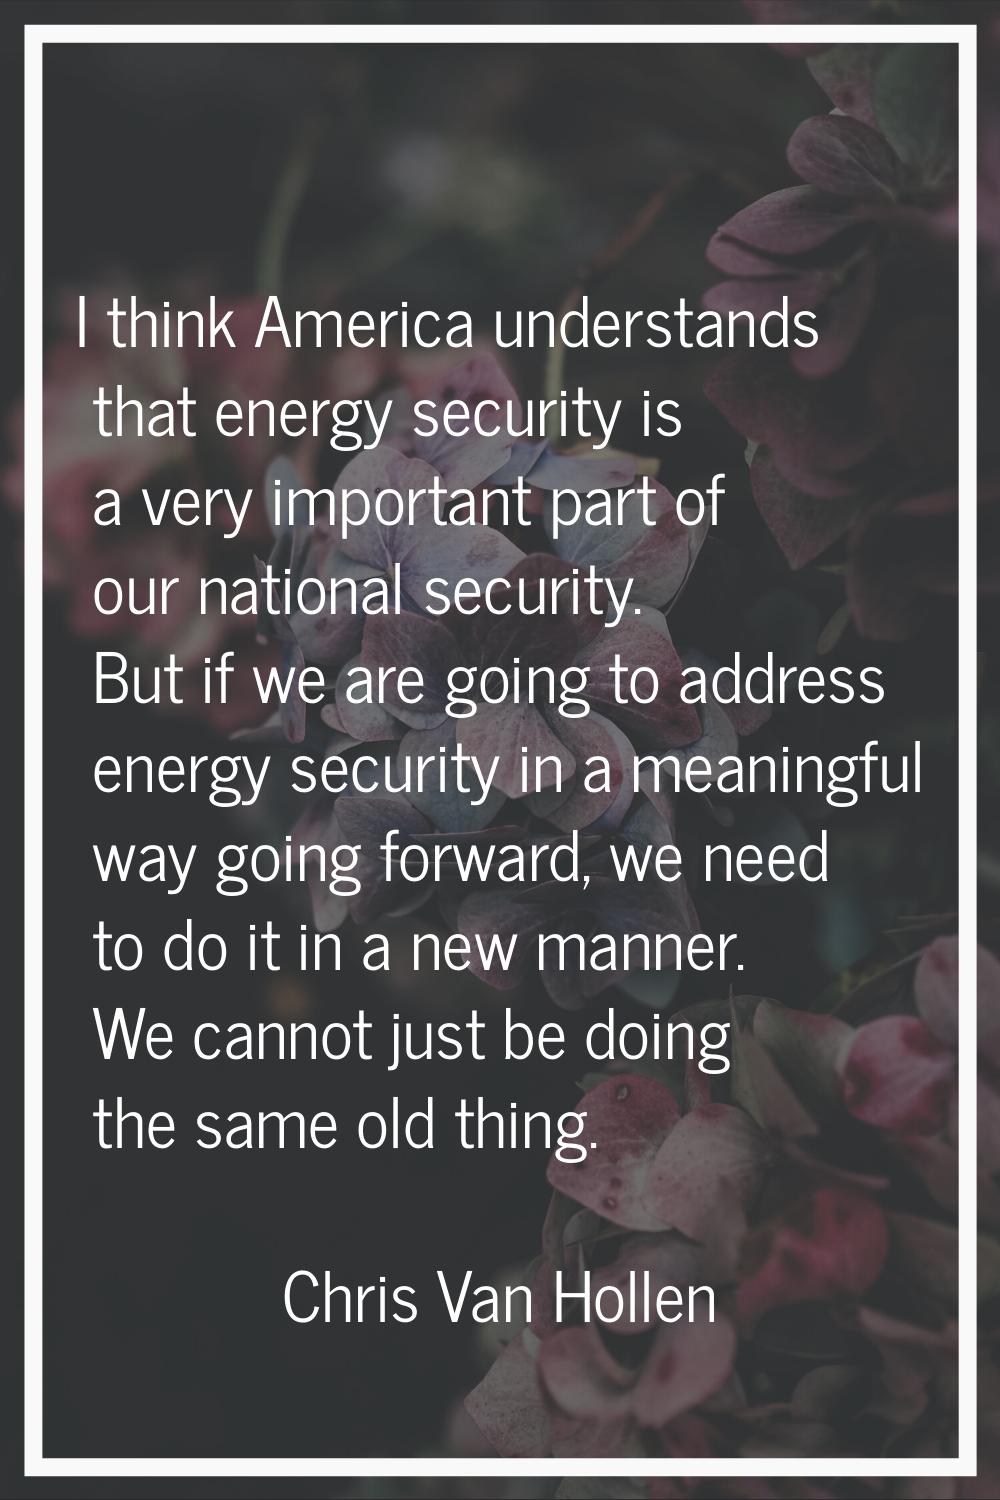 I think America understands that energy security is a very important part of our national security.